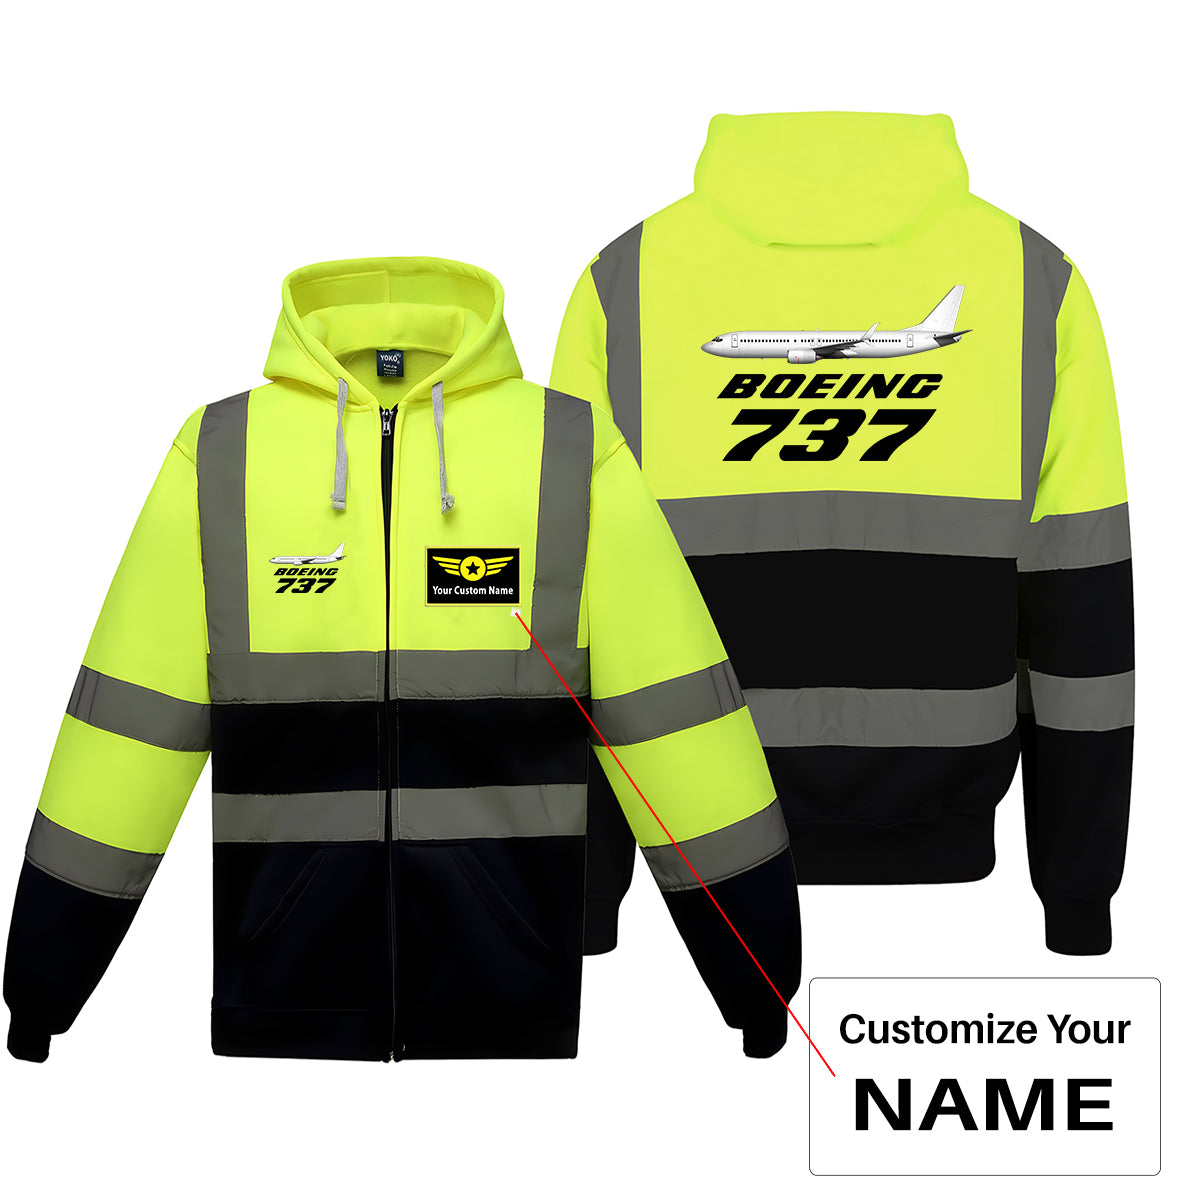 The Boeing 737 Designed Reflective Zipped Hoodies